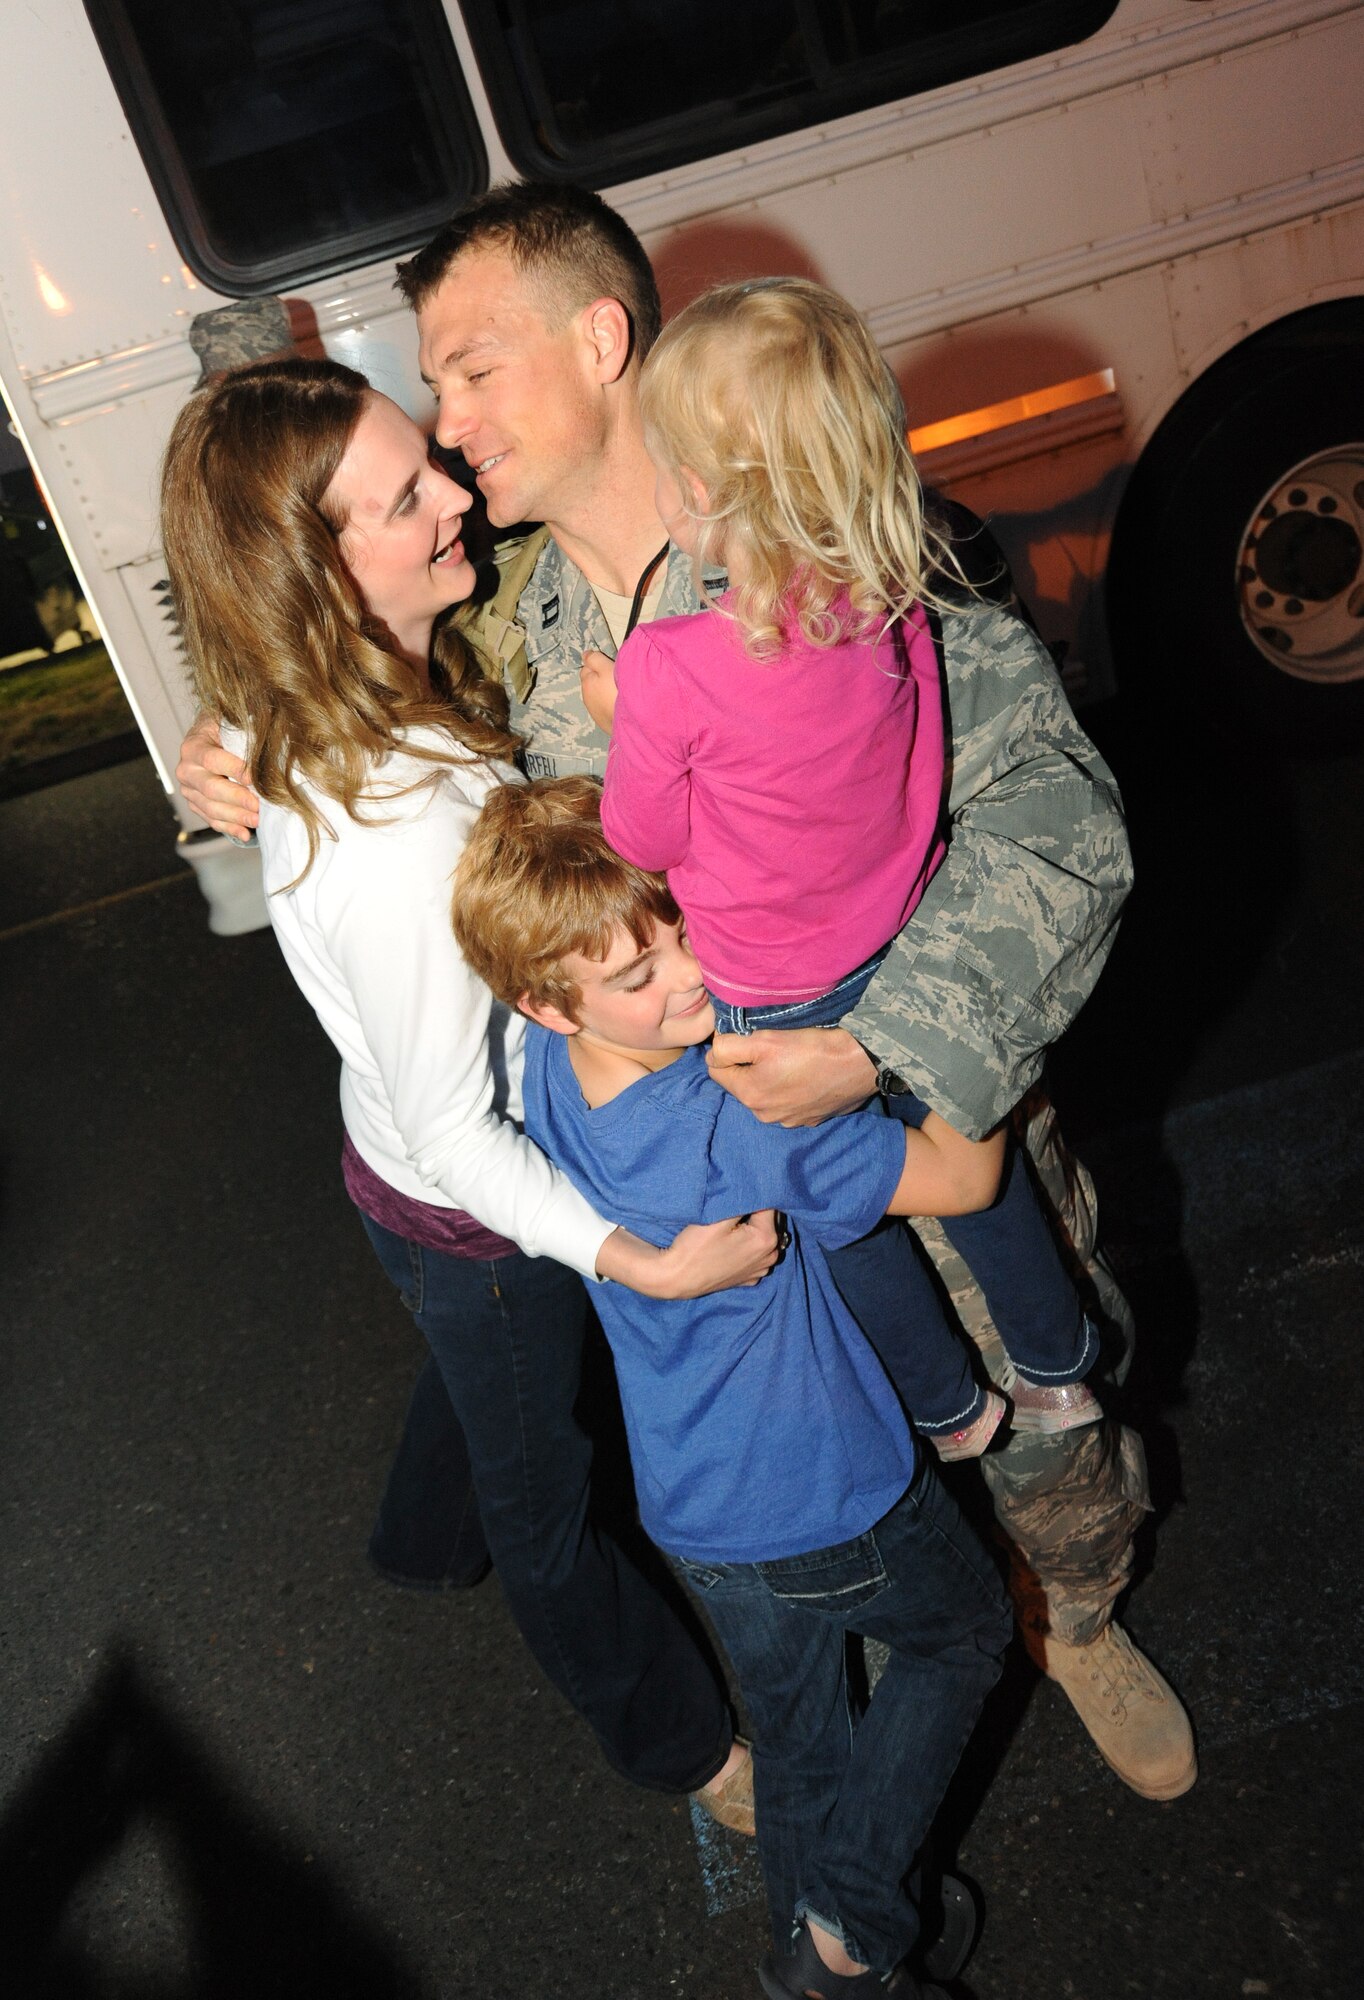 Oregon Air National Guard Capt. Zachary Marfell of the 116th Air Control Squadron is welcomed home by family and friends at the Portland Air National Guard Base, Portland, Ore., on July 20, 2011. Members of the 116th ACS, based out of Camp Rilea, Ore. have just returned from a four-mouth deployment to the Middle East. (U.S. Air Force photo by Tech. Sgt. John Hughel, 142 Fighter Wing public affairs) 

